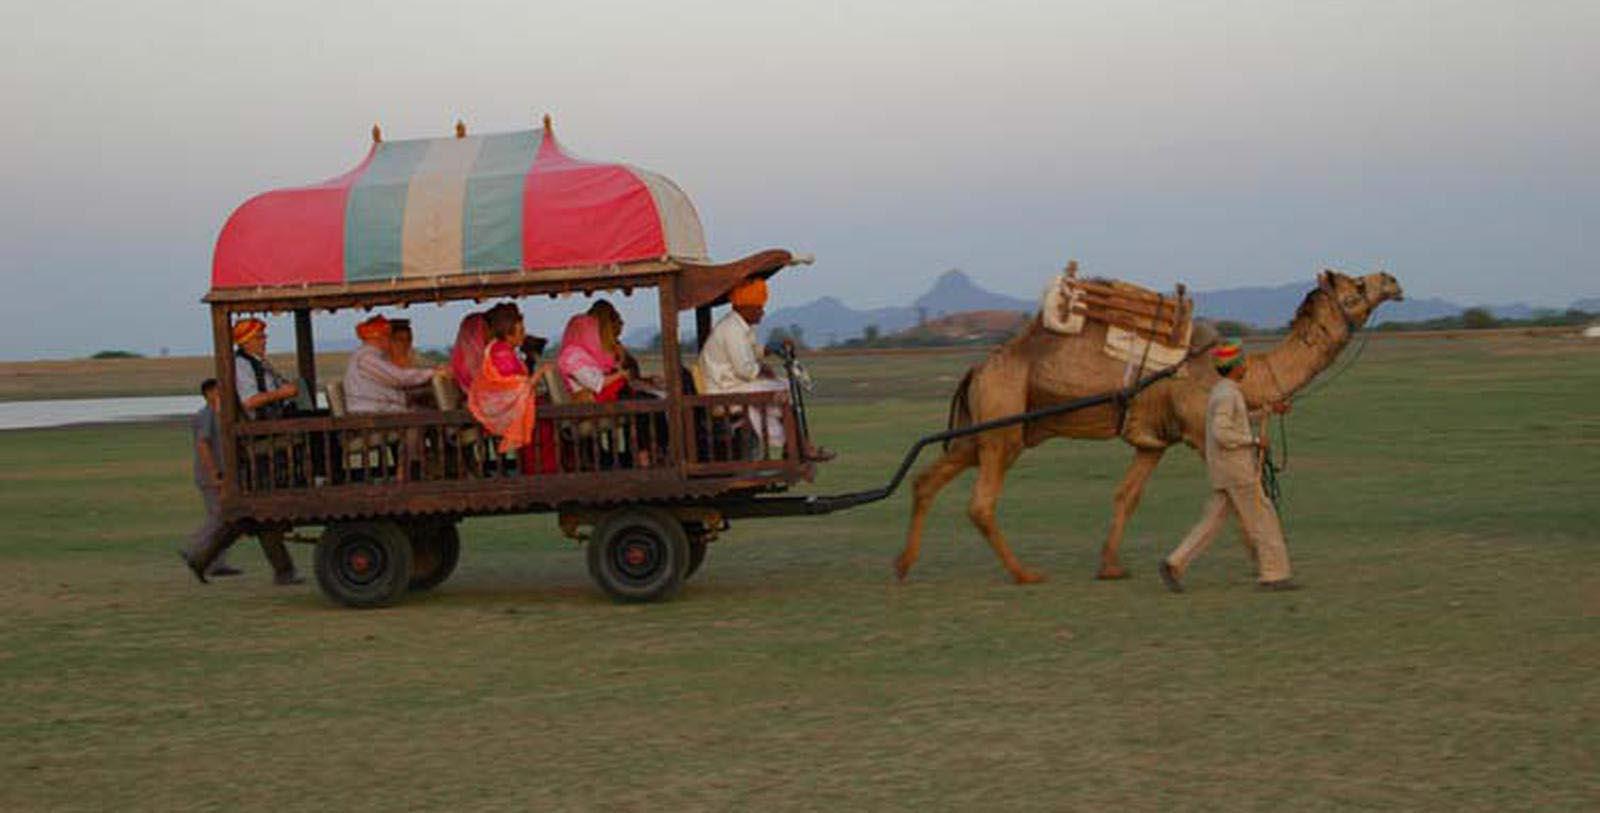 Image of camel pulling a carriage Deogarh Mahal, 1670, Member of Historic Hotels Worldwide, in Deogarh, India, Hot Deals